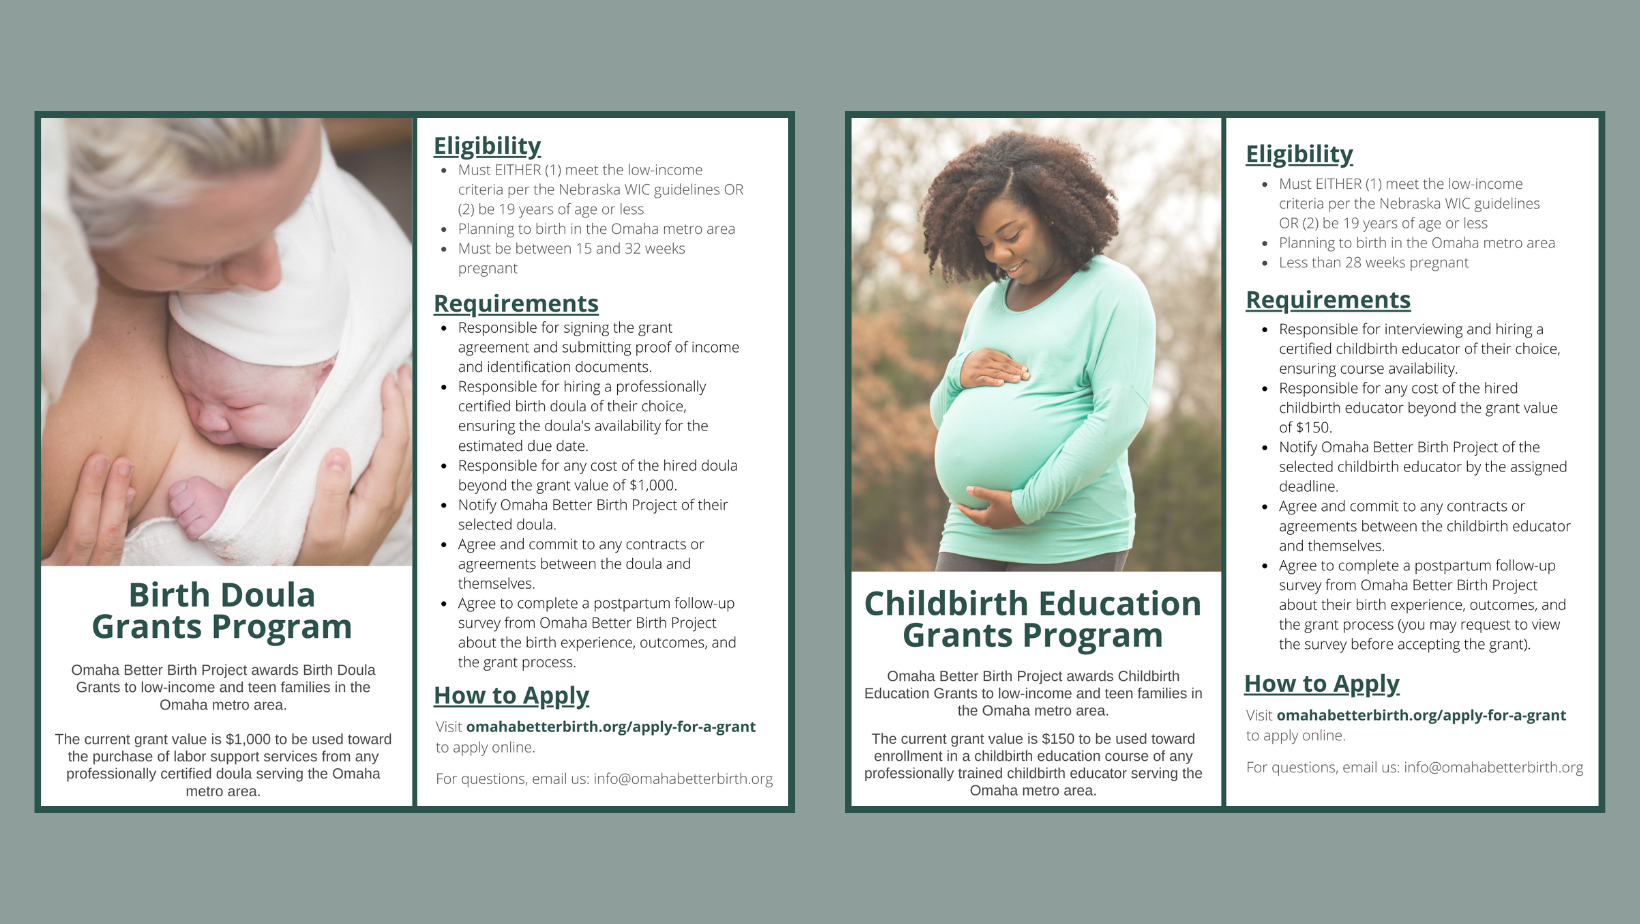 Description of birth doula grant program and childbirth education grant program, including eligibility, requirements, and how to apply.